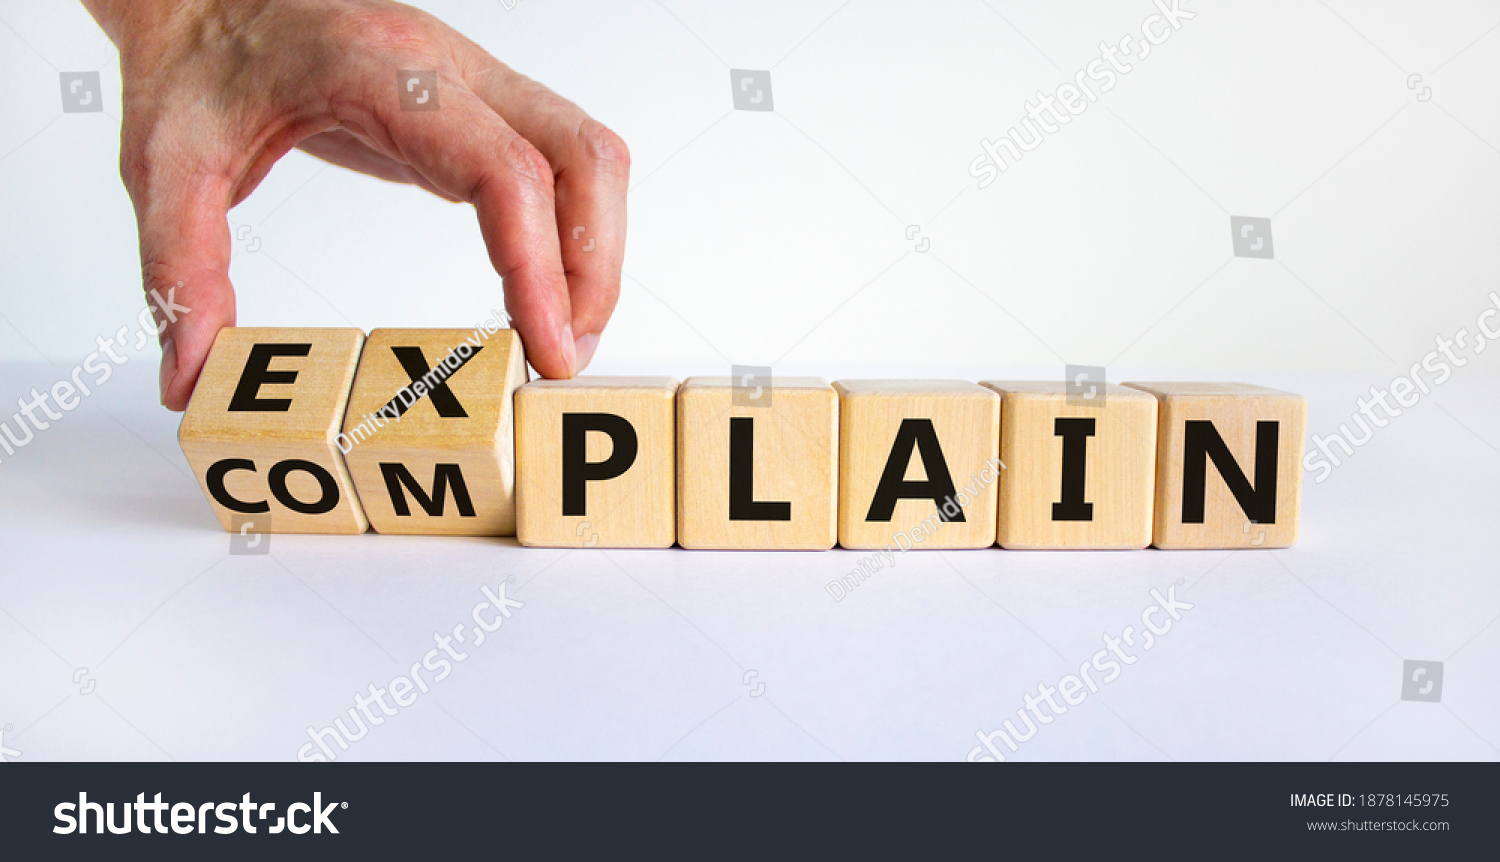 Explain vs complain symbol. Male hand flips wooden cubes and changes the word 'complain' to 'explain'. Beautiful white background, copy space. Business and explain vs complain concept. #1878145975